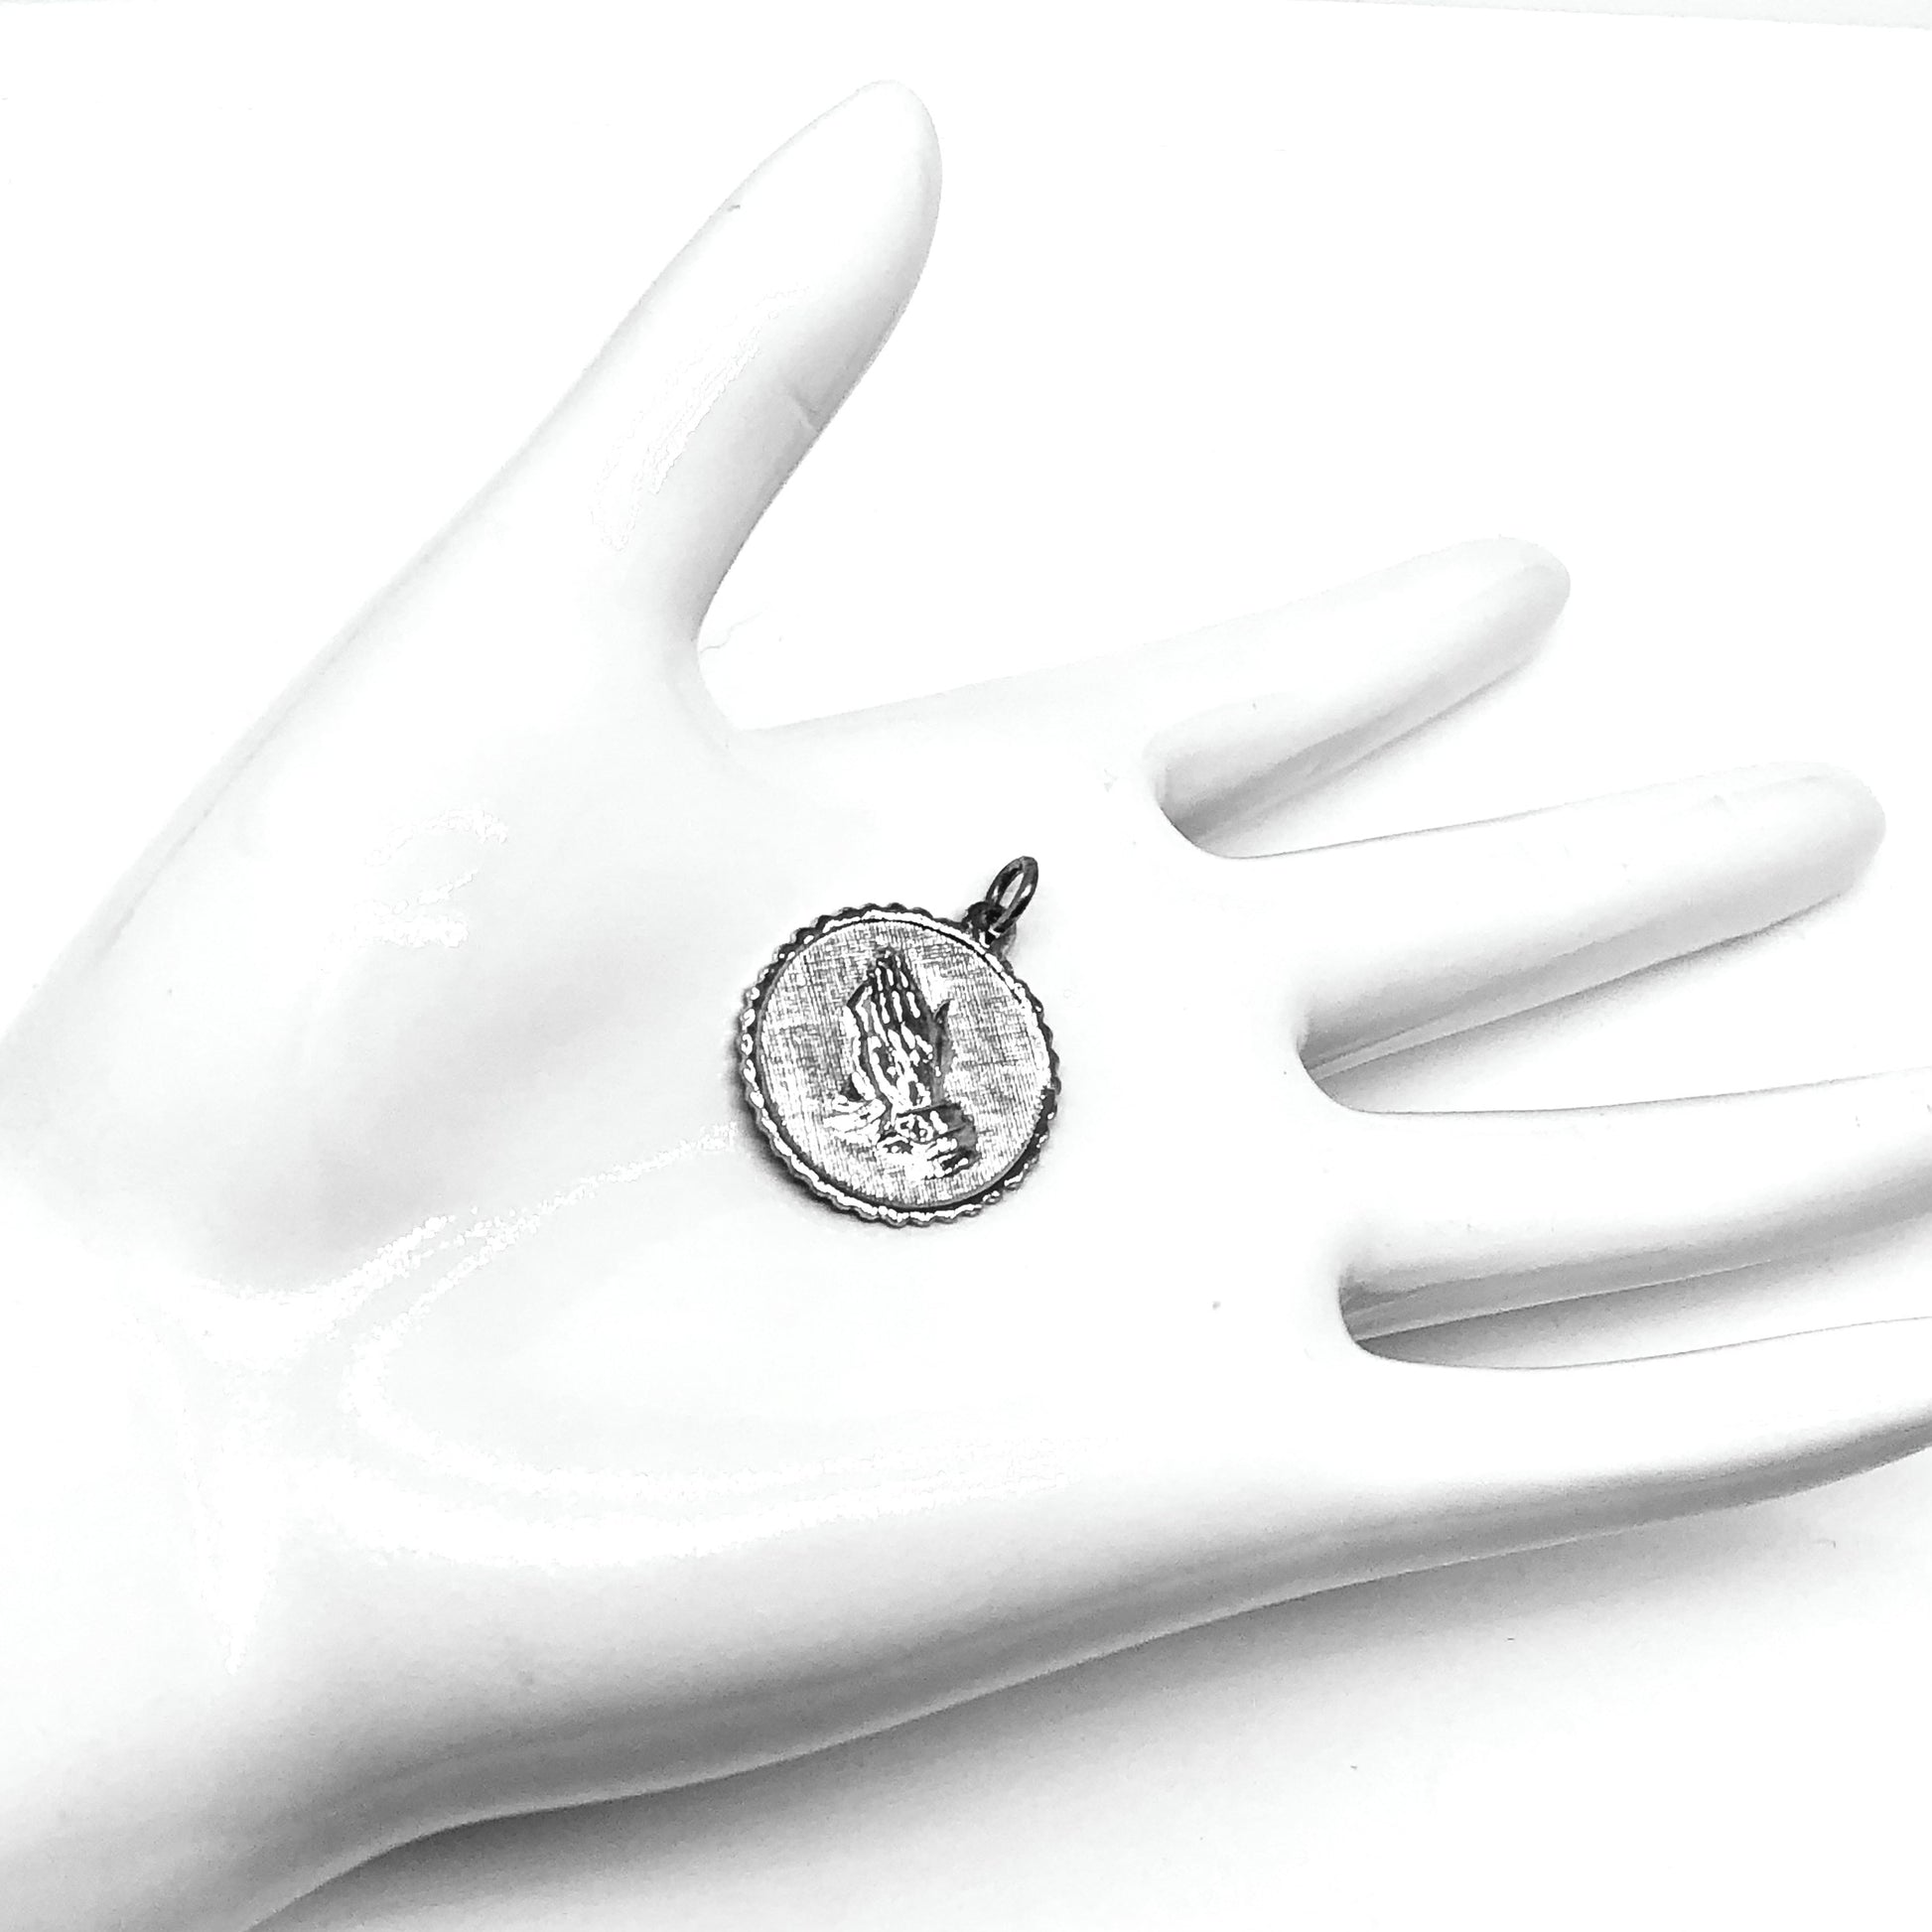 Religious Jewelry | Mens Womens Sterling Silver Praying Hands Medallion Charm Pendant